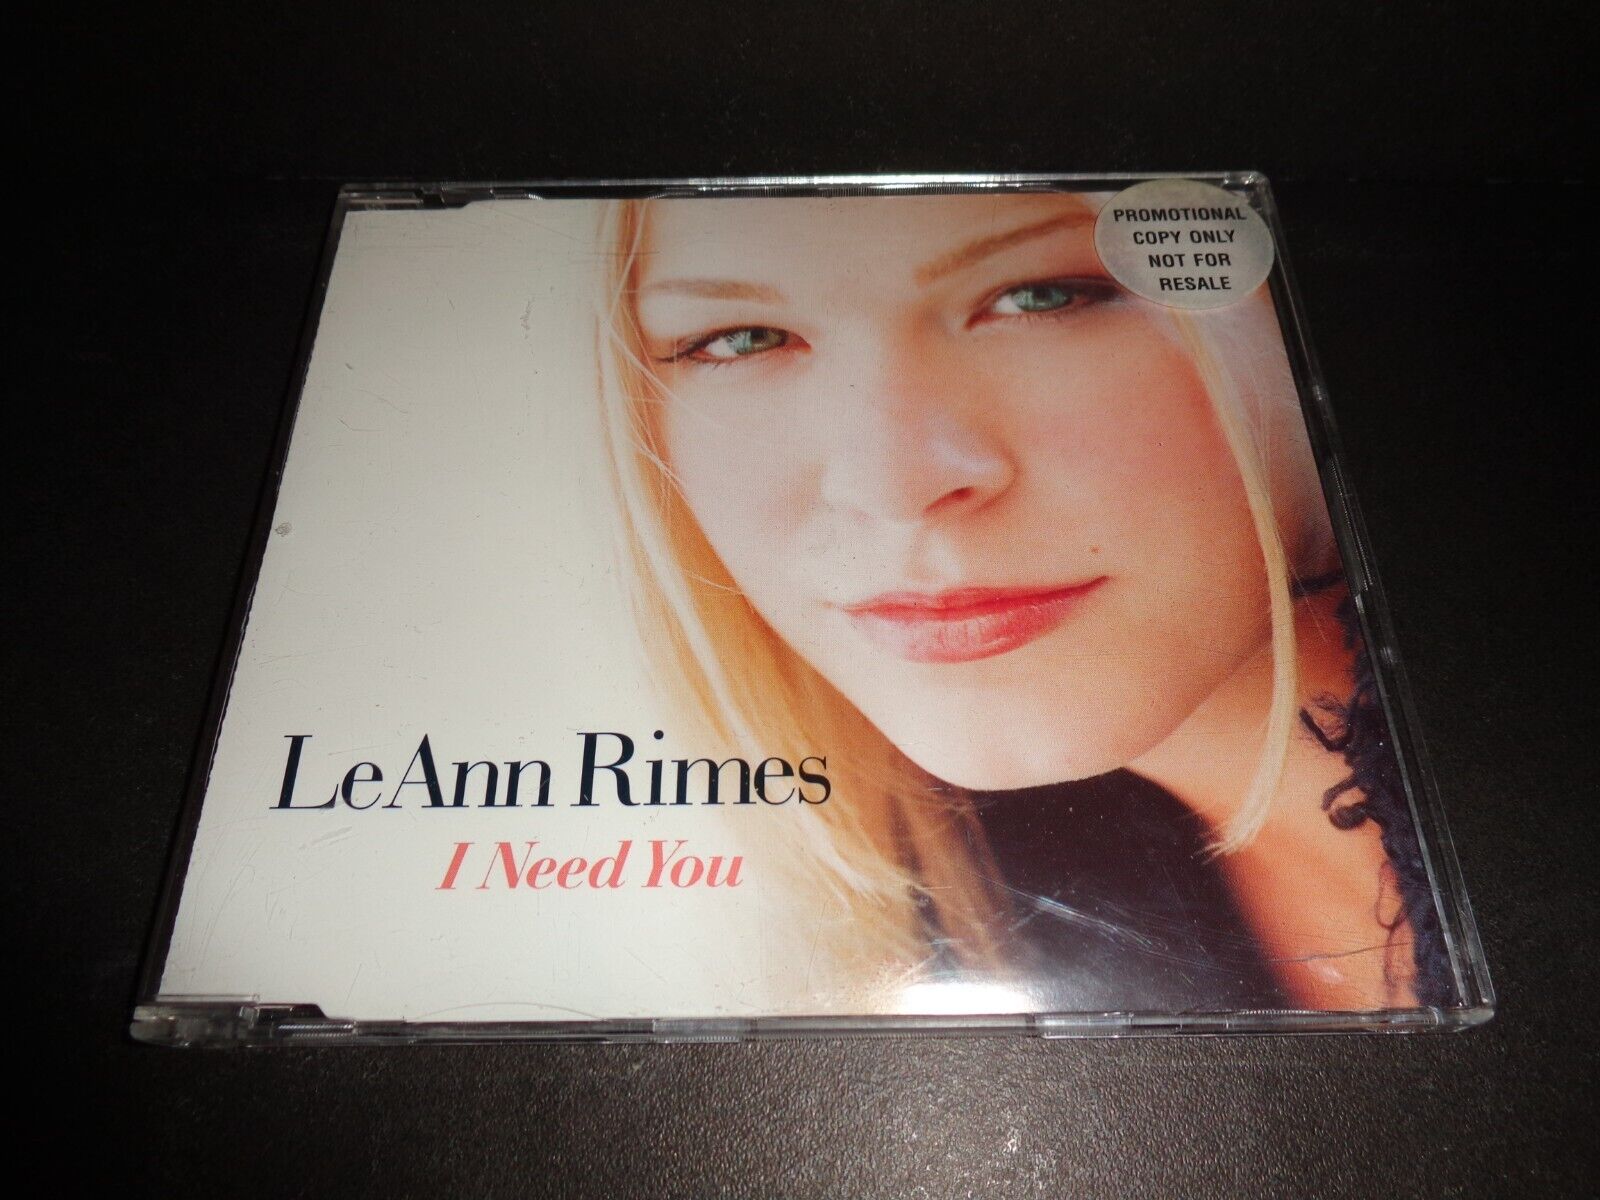 I NEED YOU by LEANN RIMES-Rare Collectible PROMOTIONAL CD Single--CD